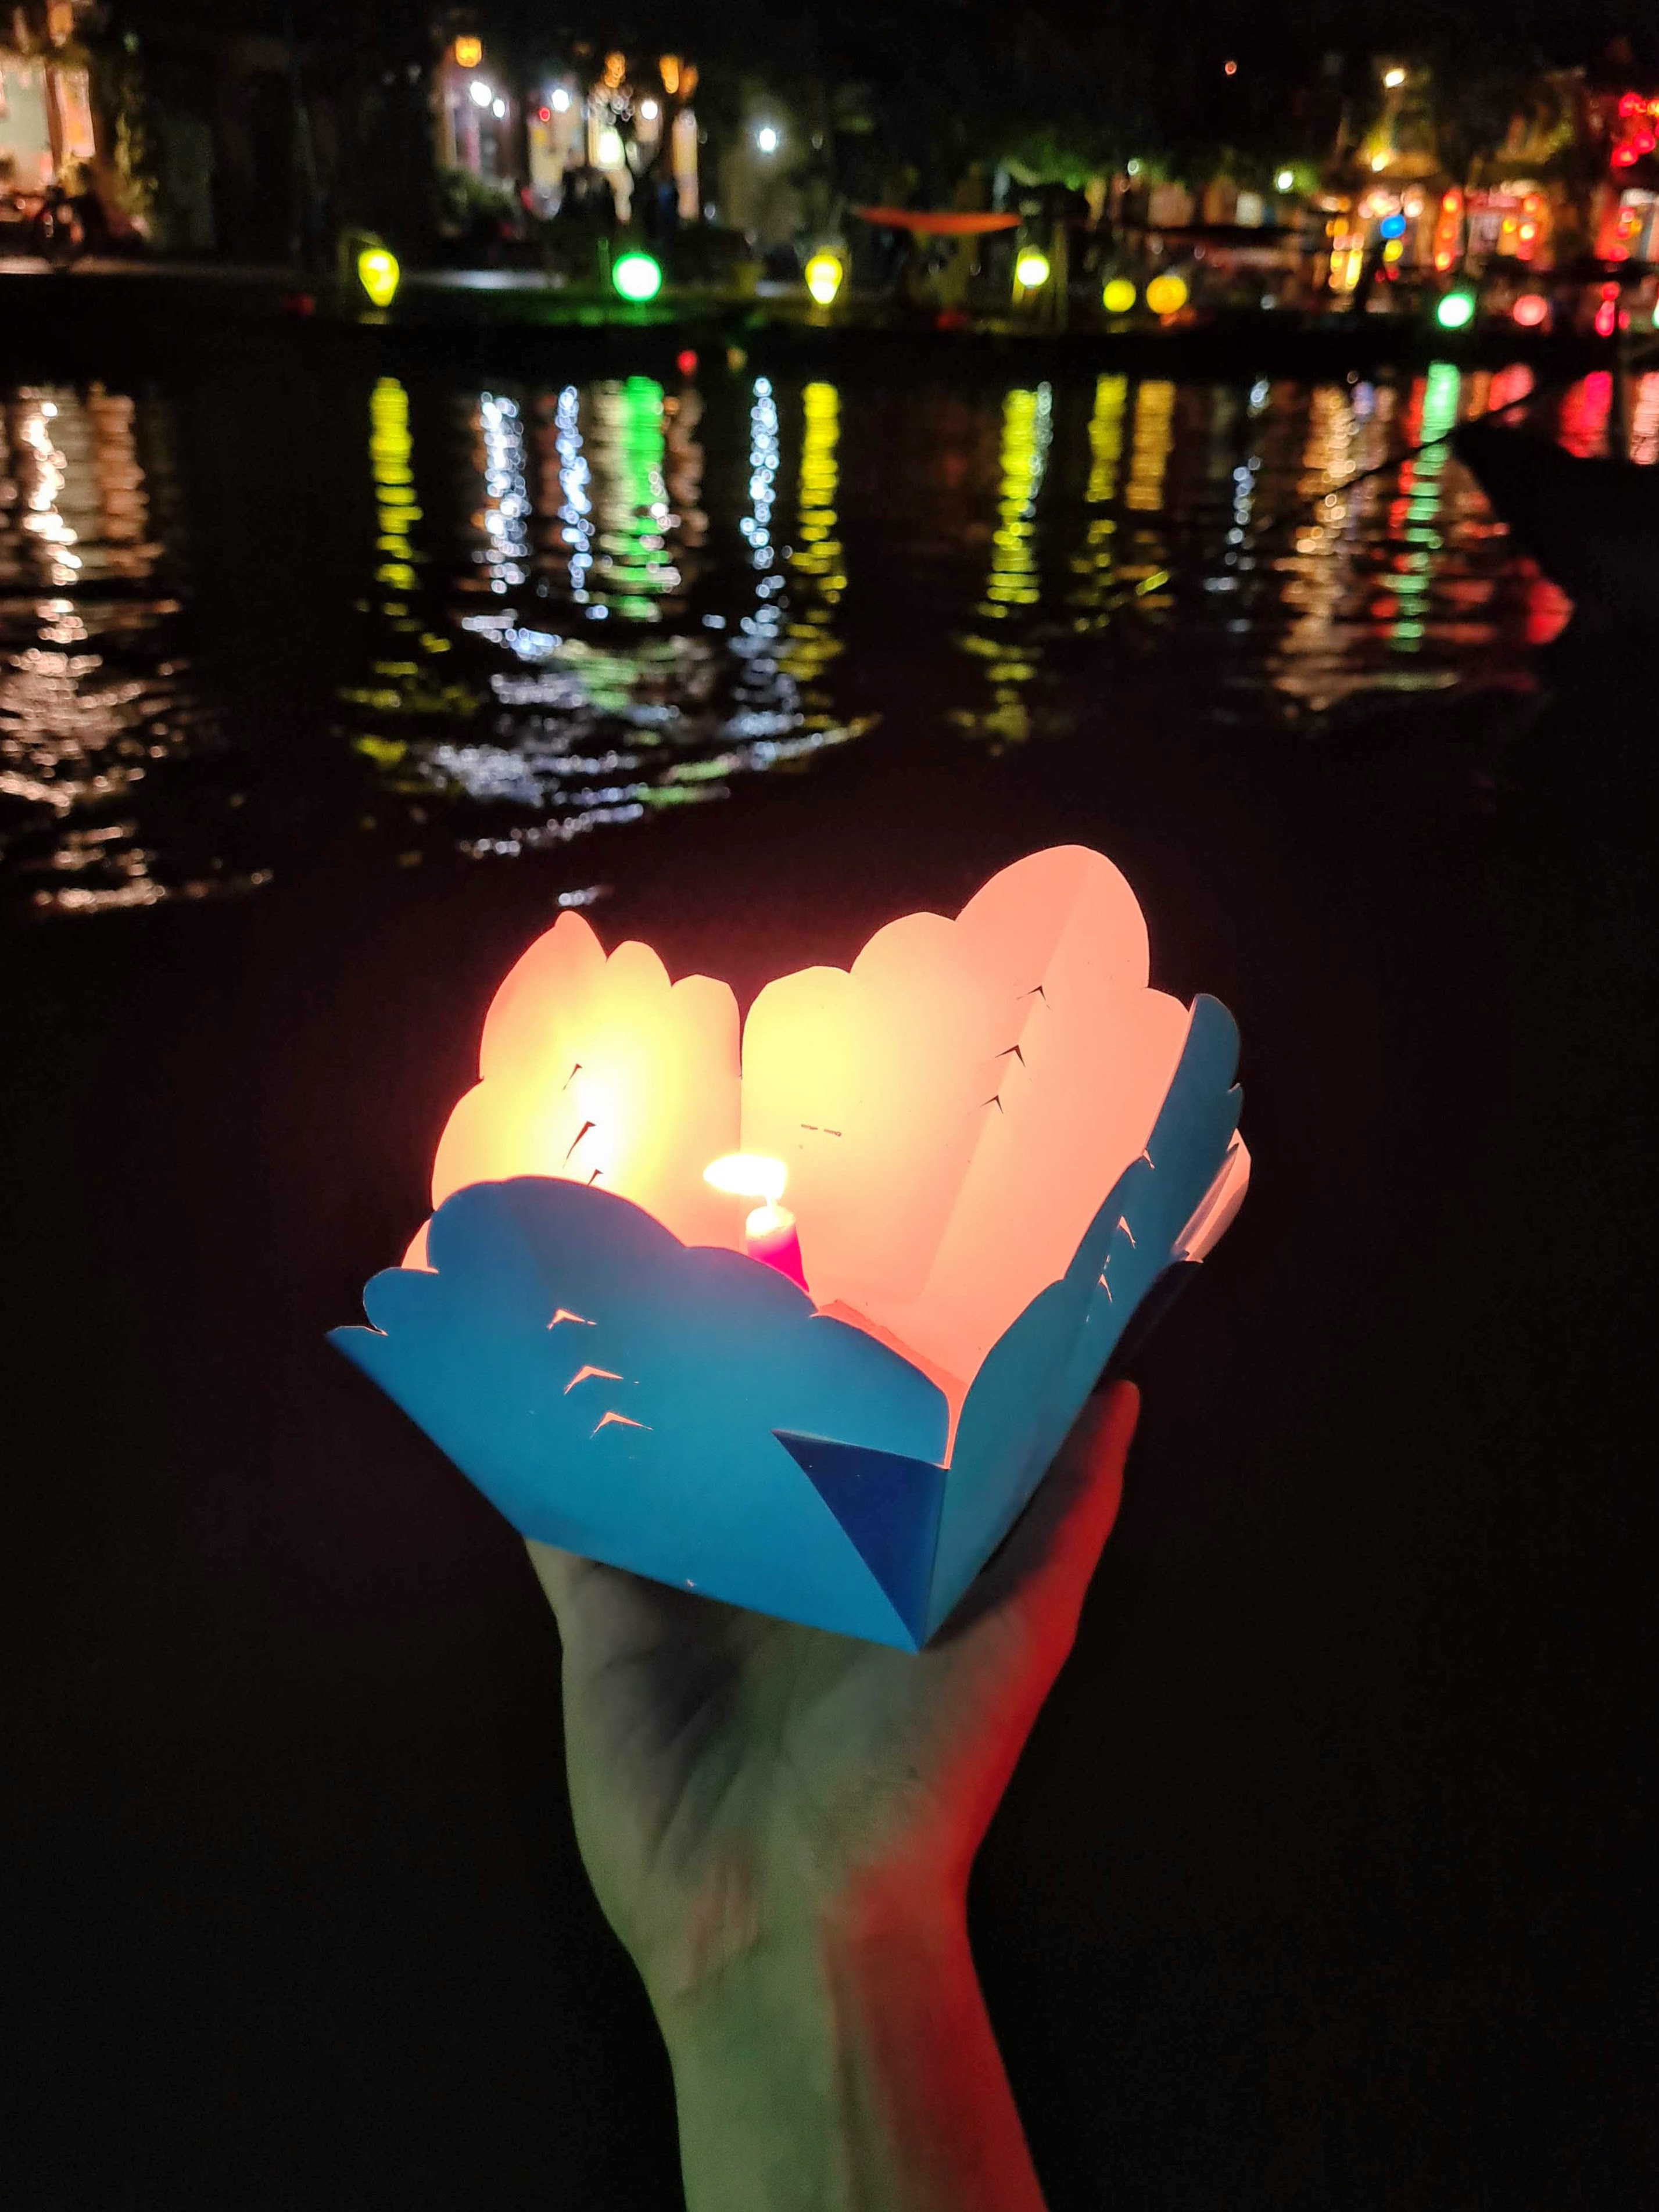 A tourist holds a candle-lit lantern while taking a boat ride along the Hoai River in Hoi An Ancient Town, Quang Nam Province, Vietnam. Photo taken on April 3, 2022. Photo: Duy Khang / Tuoi Tre